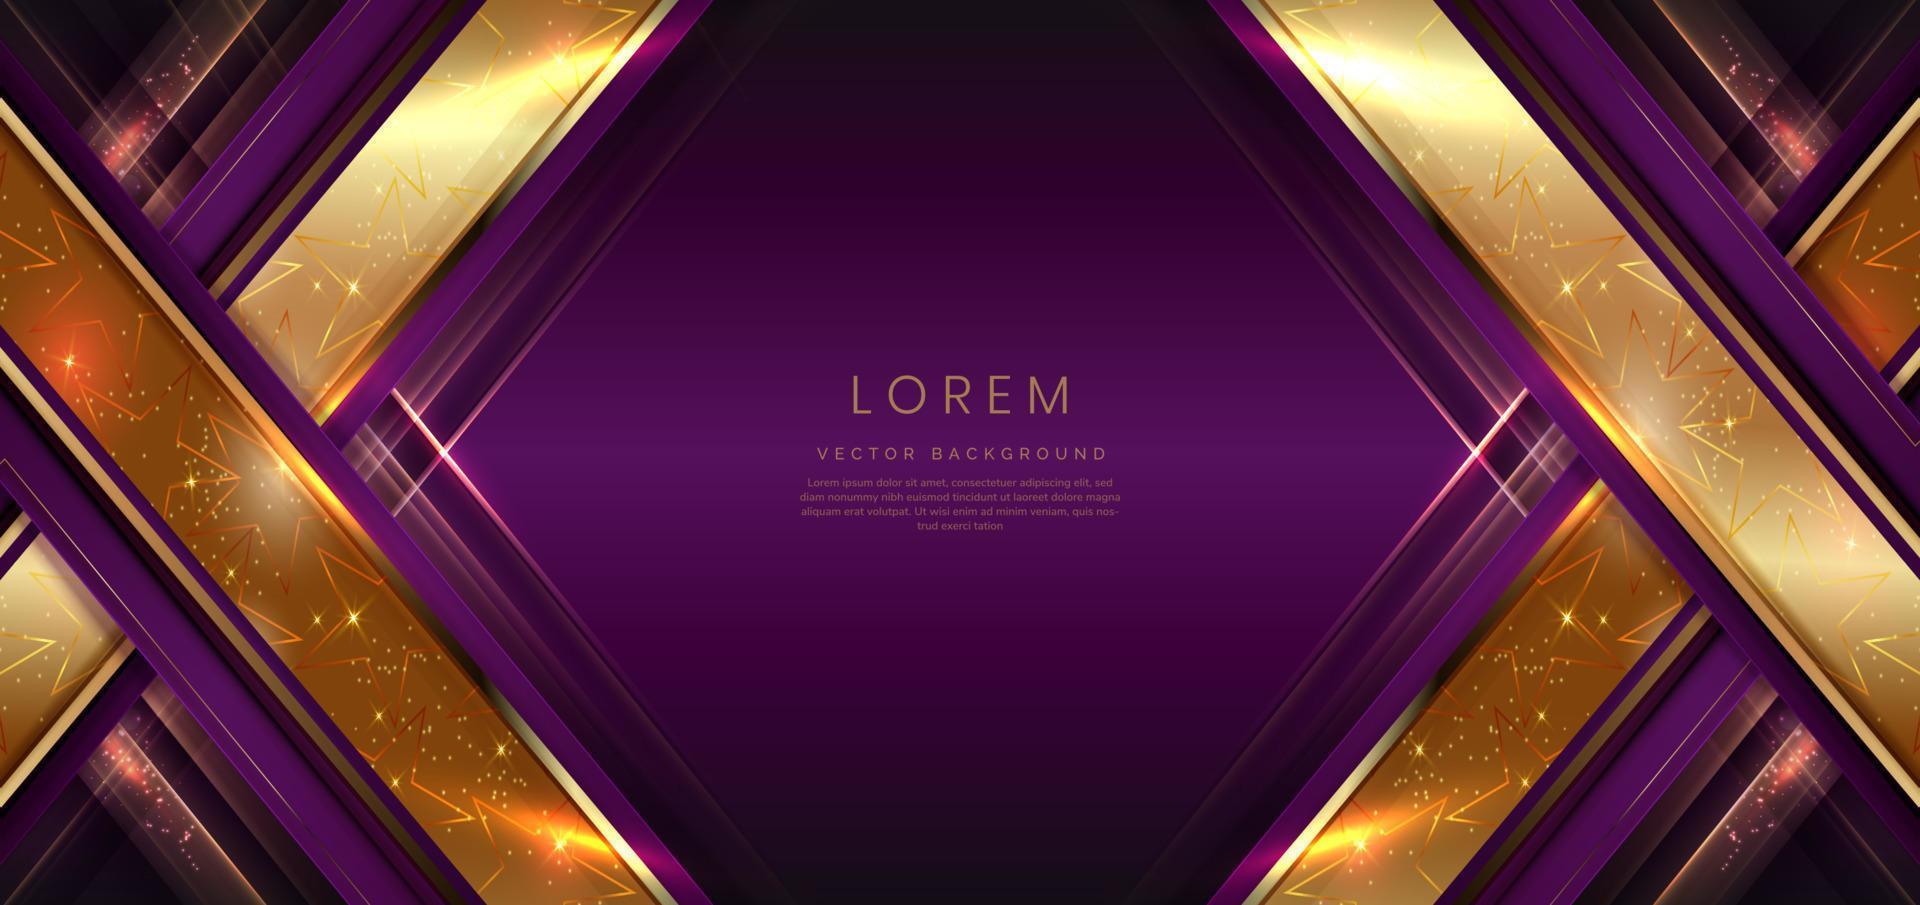 Elegant vertical violet luxury background with diagonal lighting effect and sparkling with copy space for text. vector